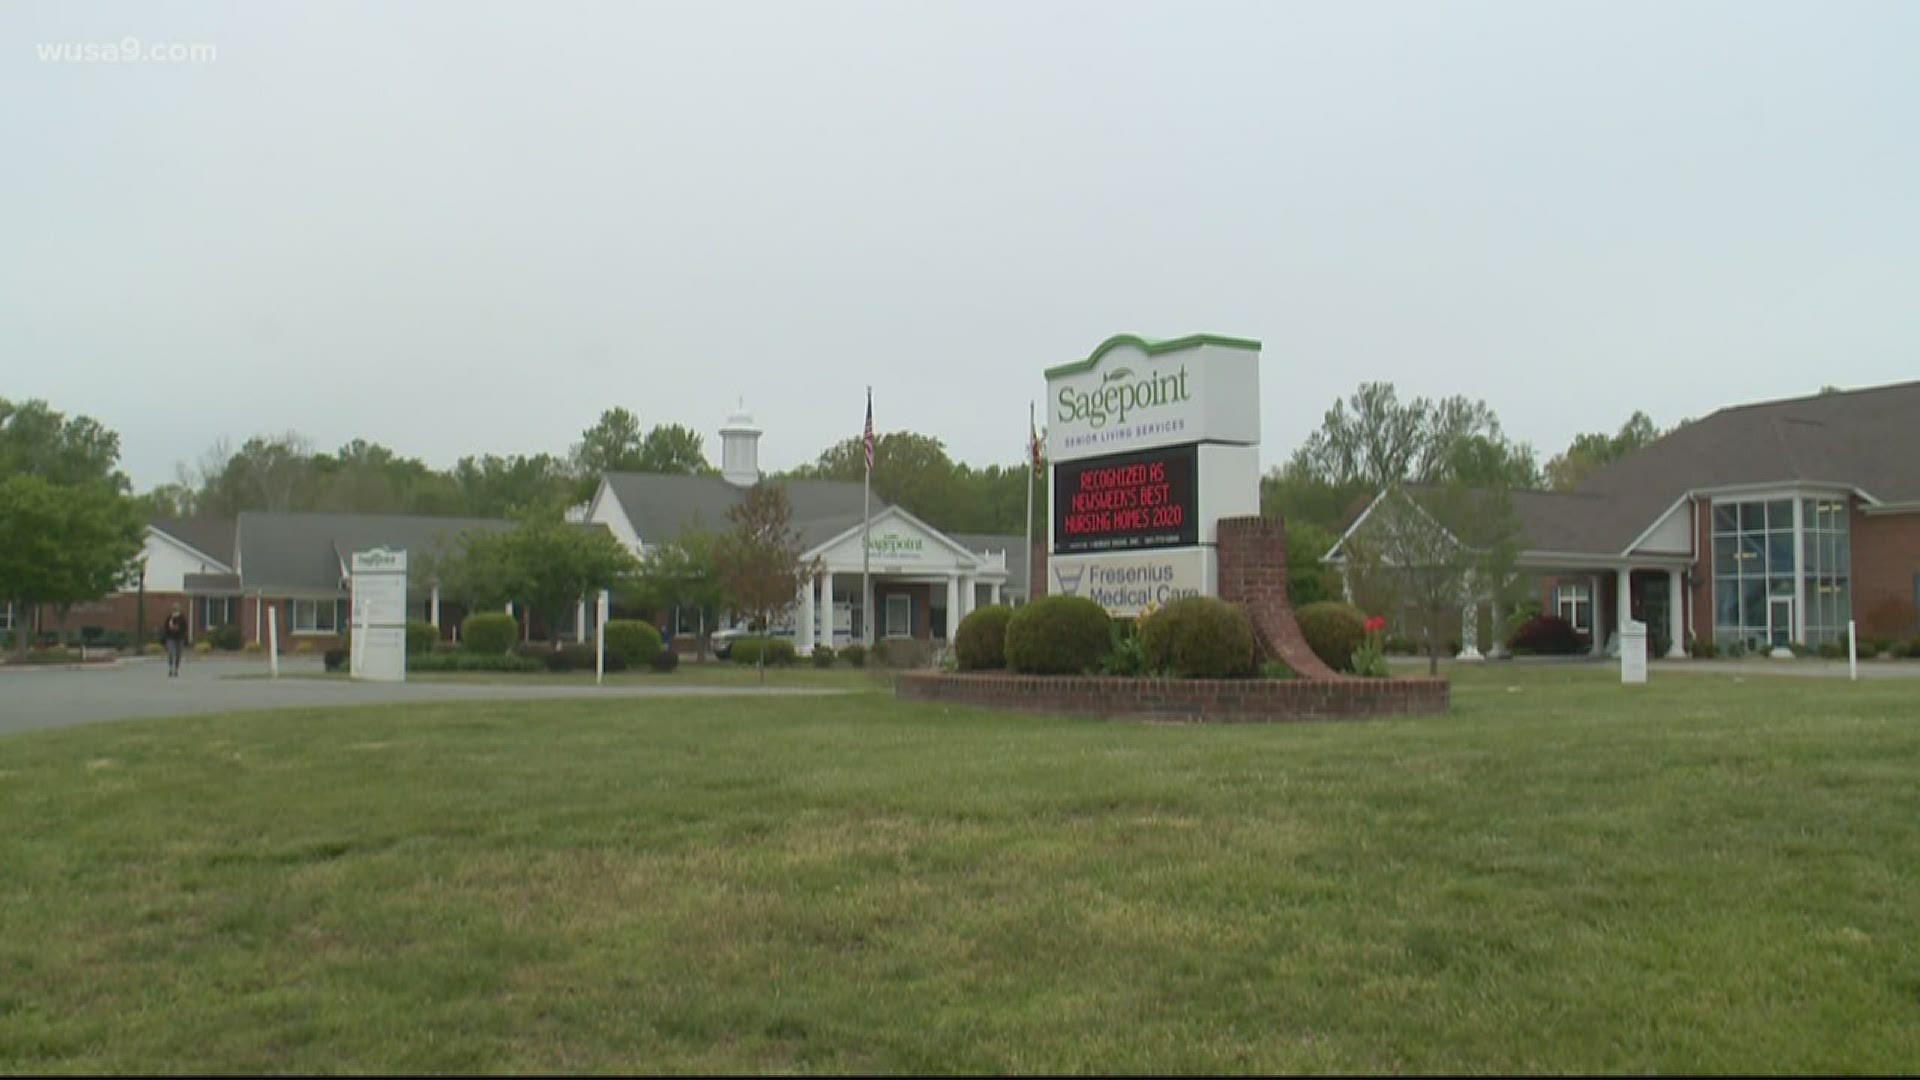 Relatives of residents at Sagepoint Senior Living Services Center in La Plata, Maryland are calling for more transparency.